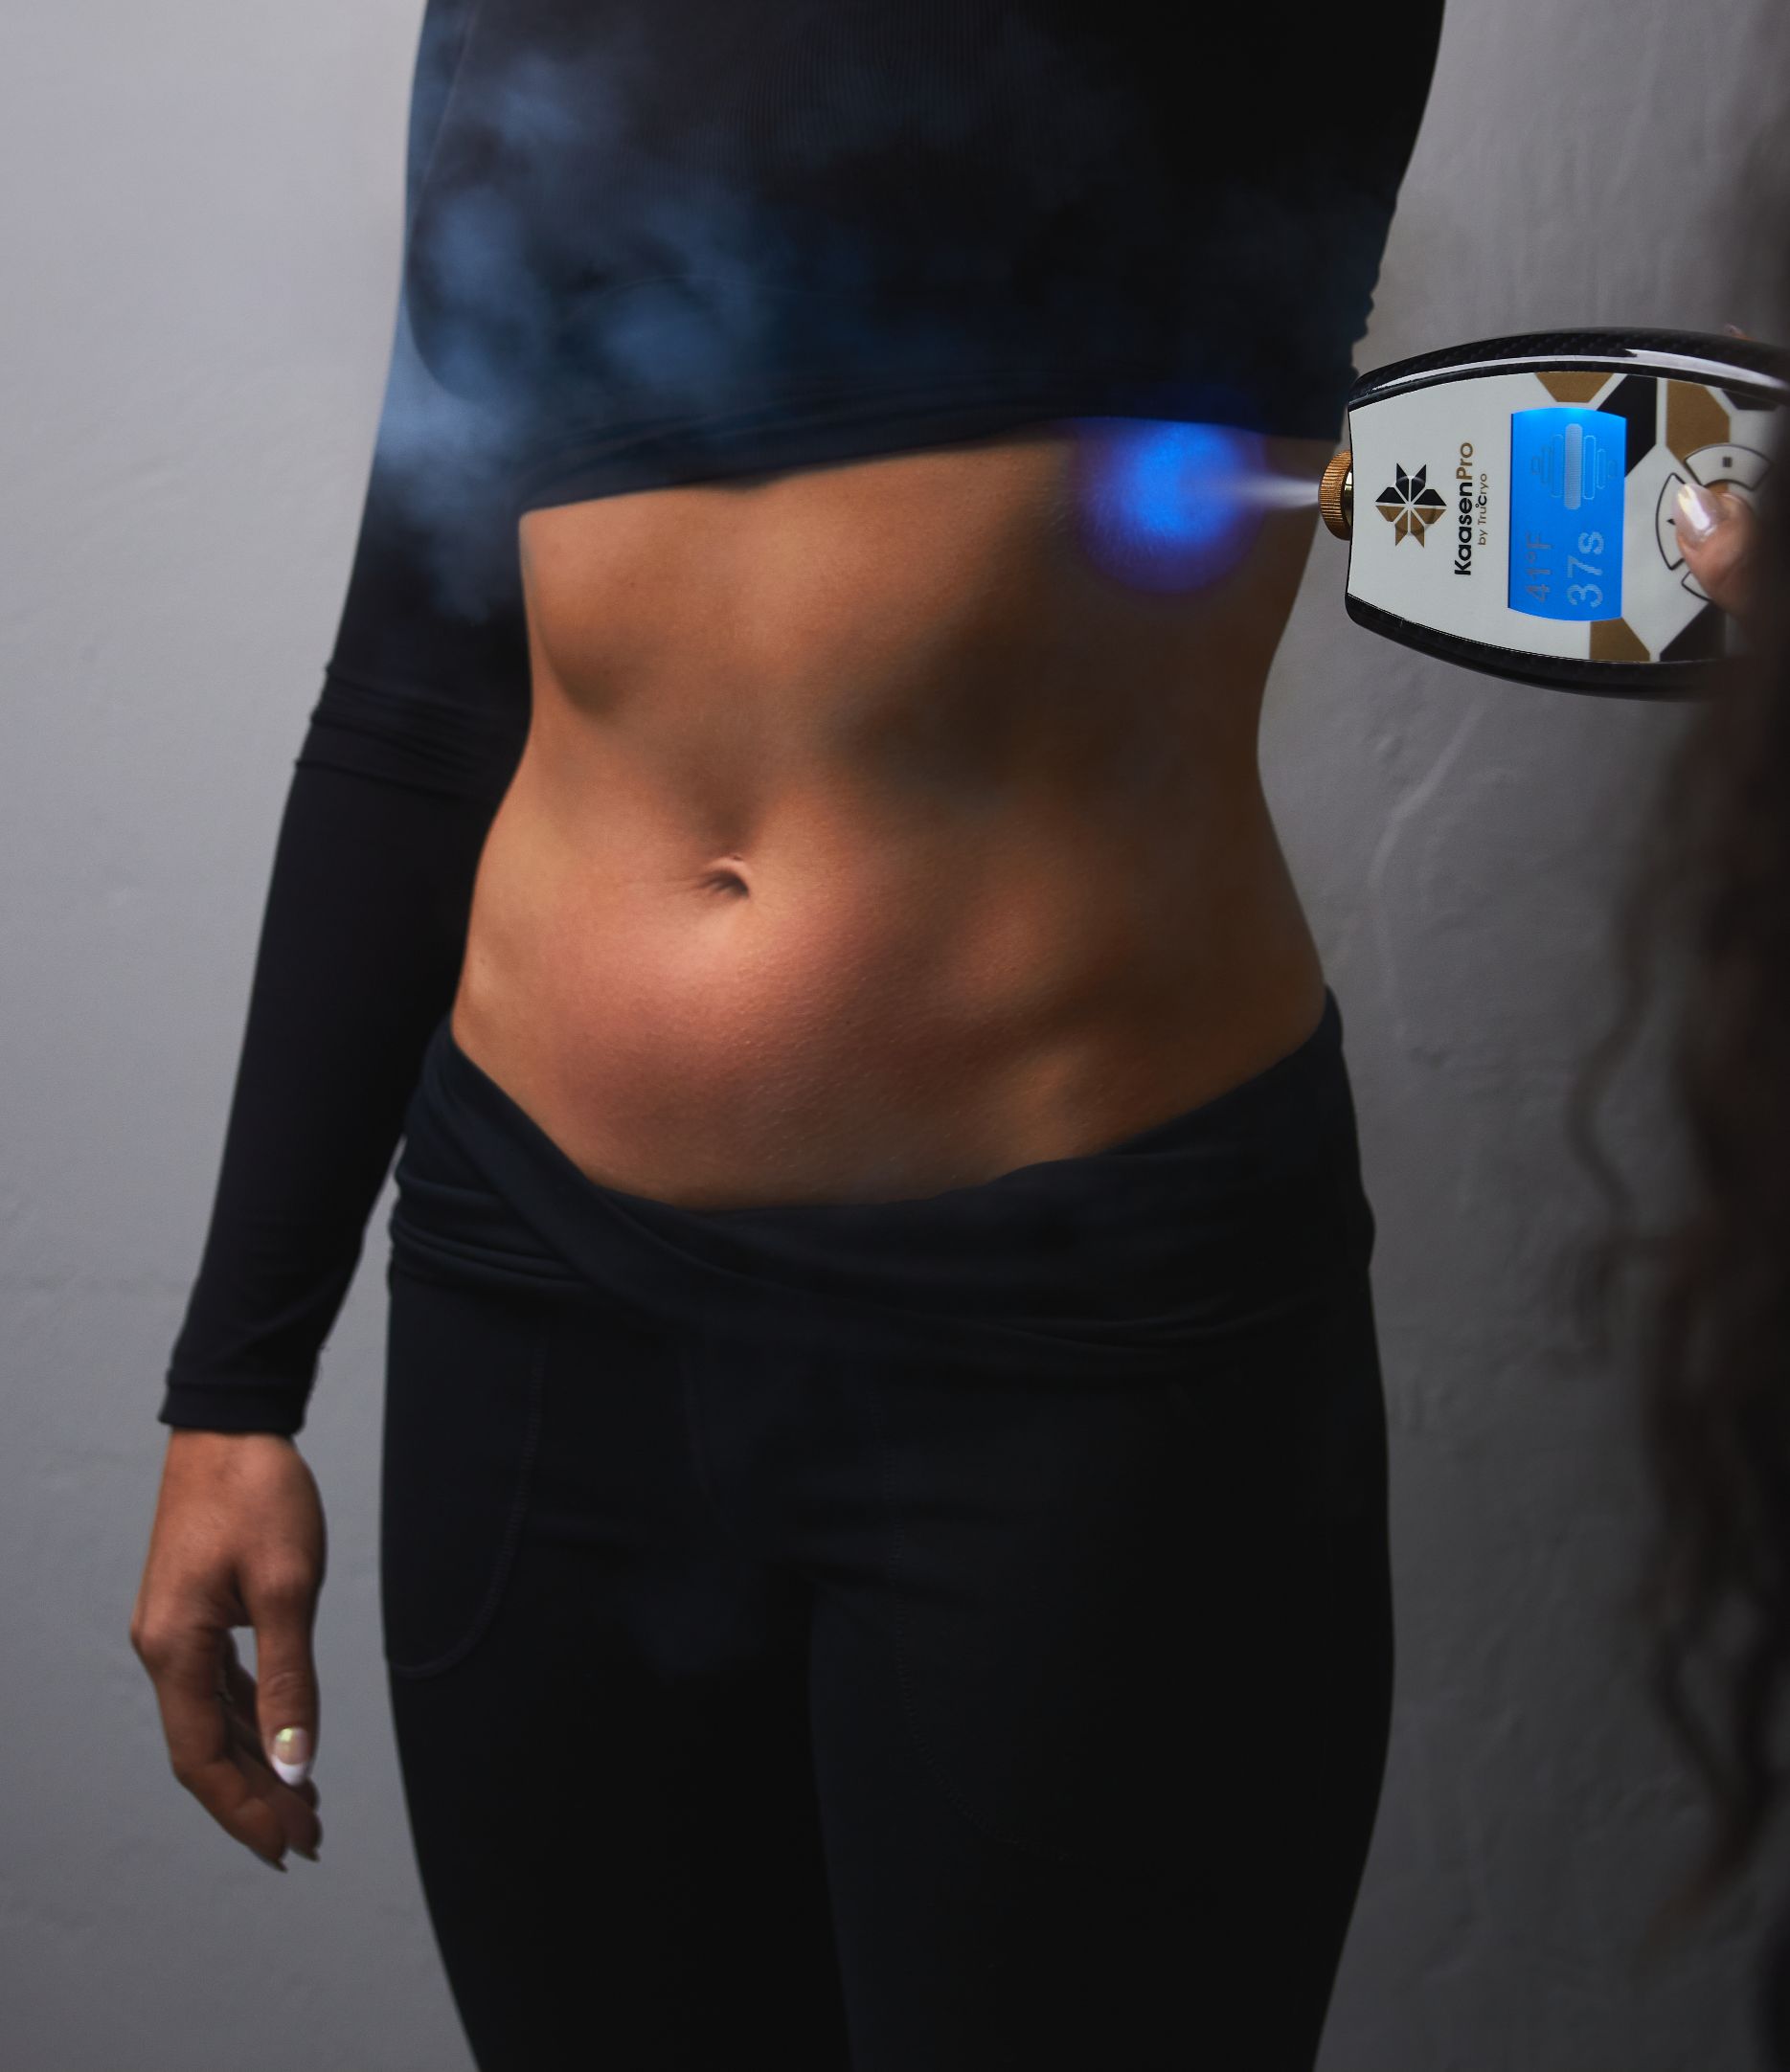 A woman receiving cryo slimming treatment on her stomach